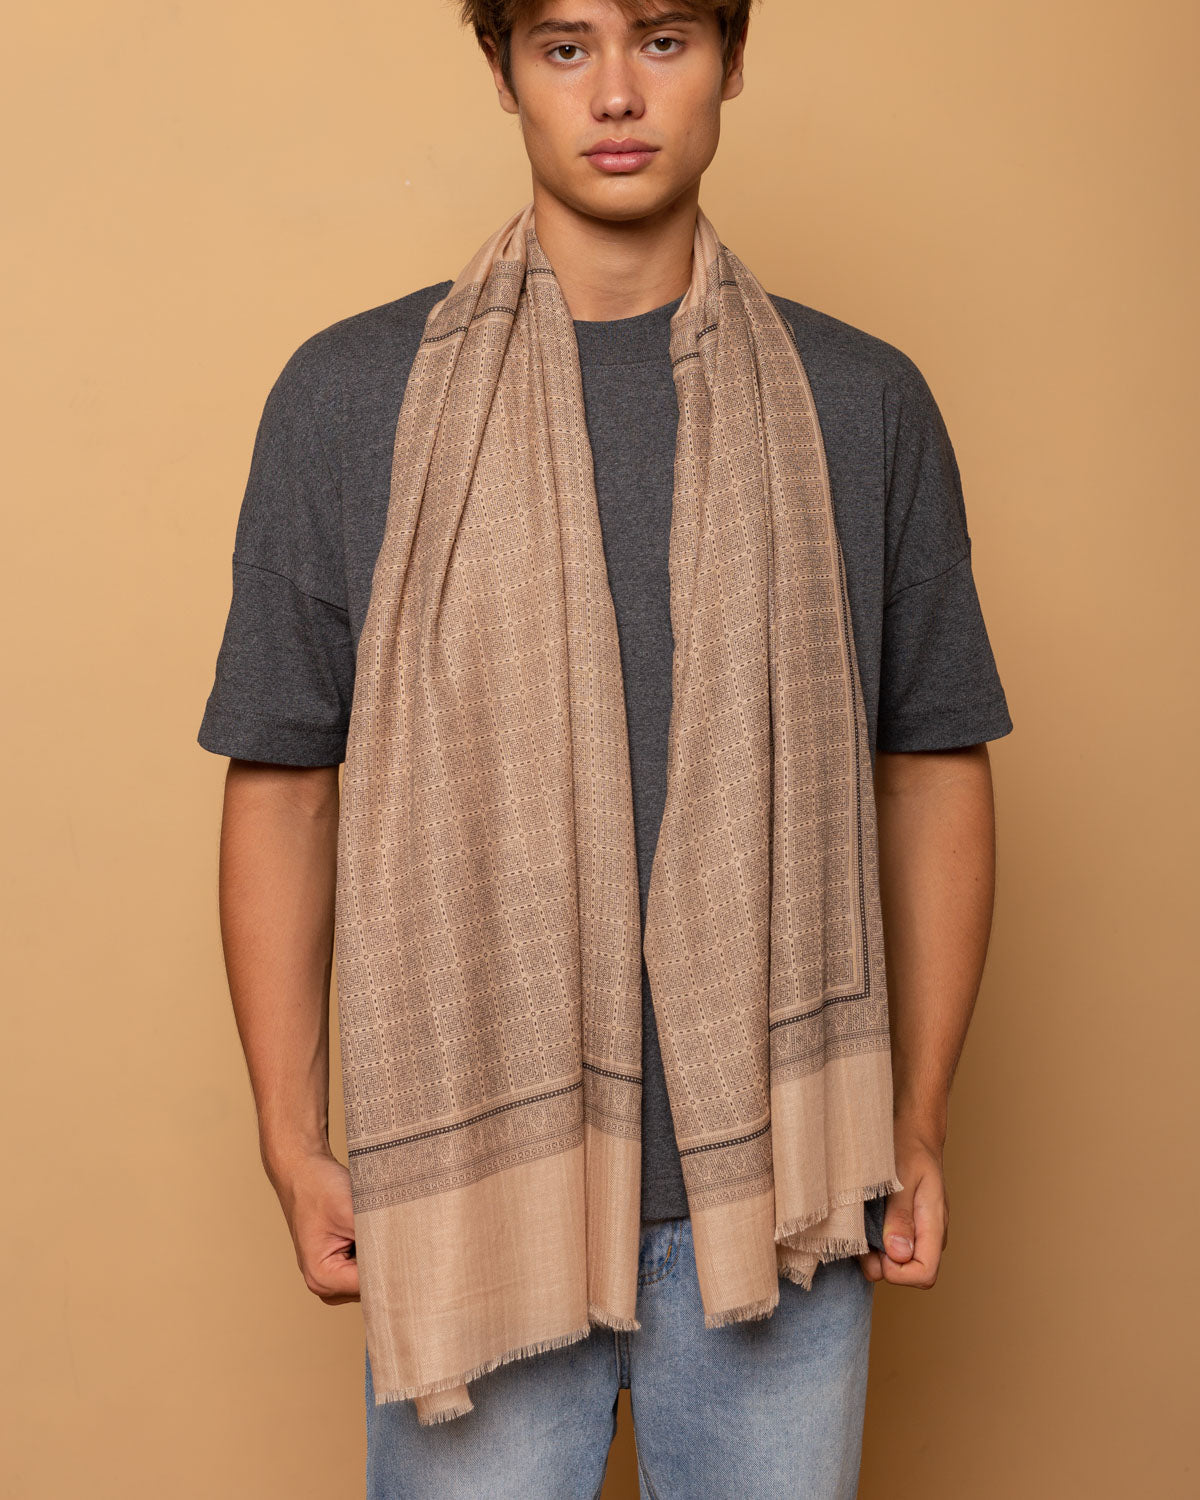 Camel-colored pashmina in cashmere blend